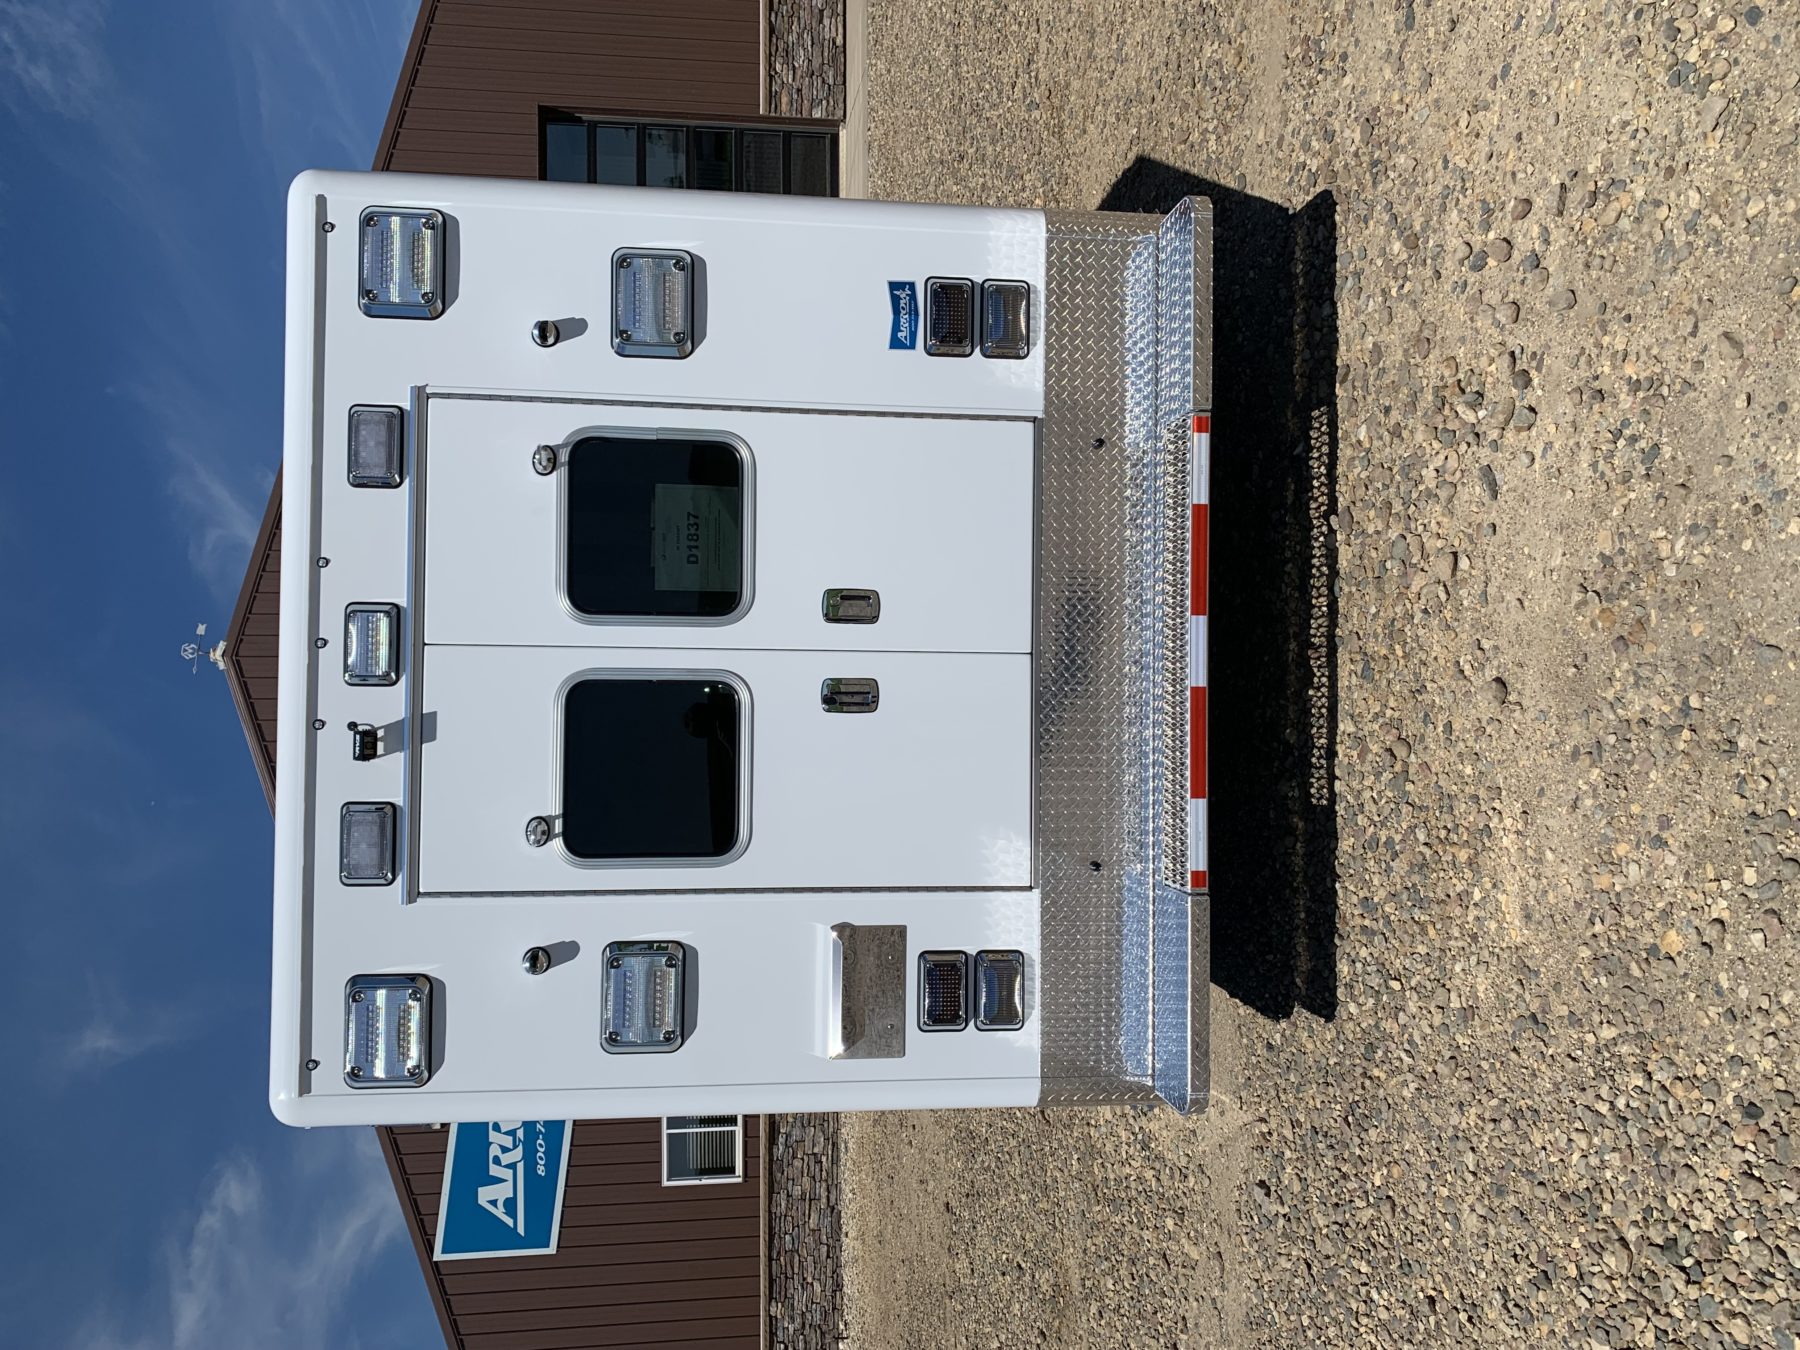 2022 Ram 4500 4x4 Heavy Duty Ambulance For Sale – Picture 7